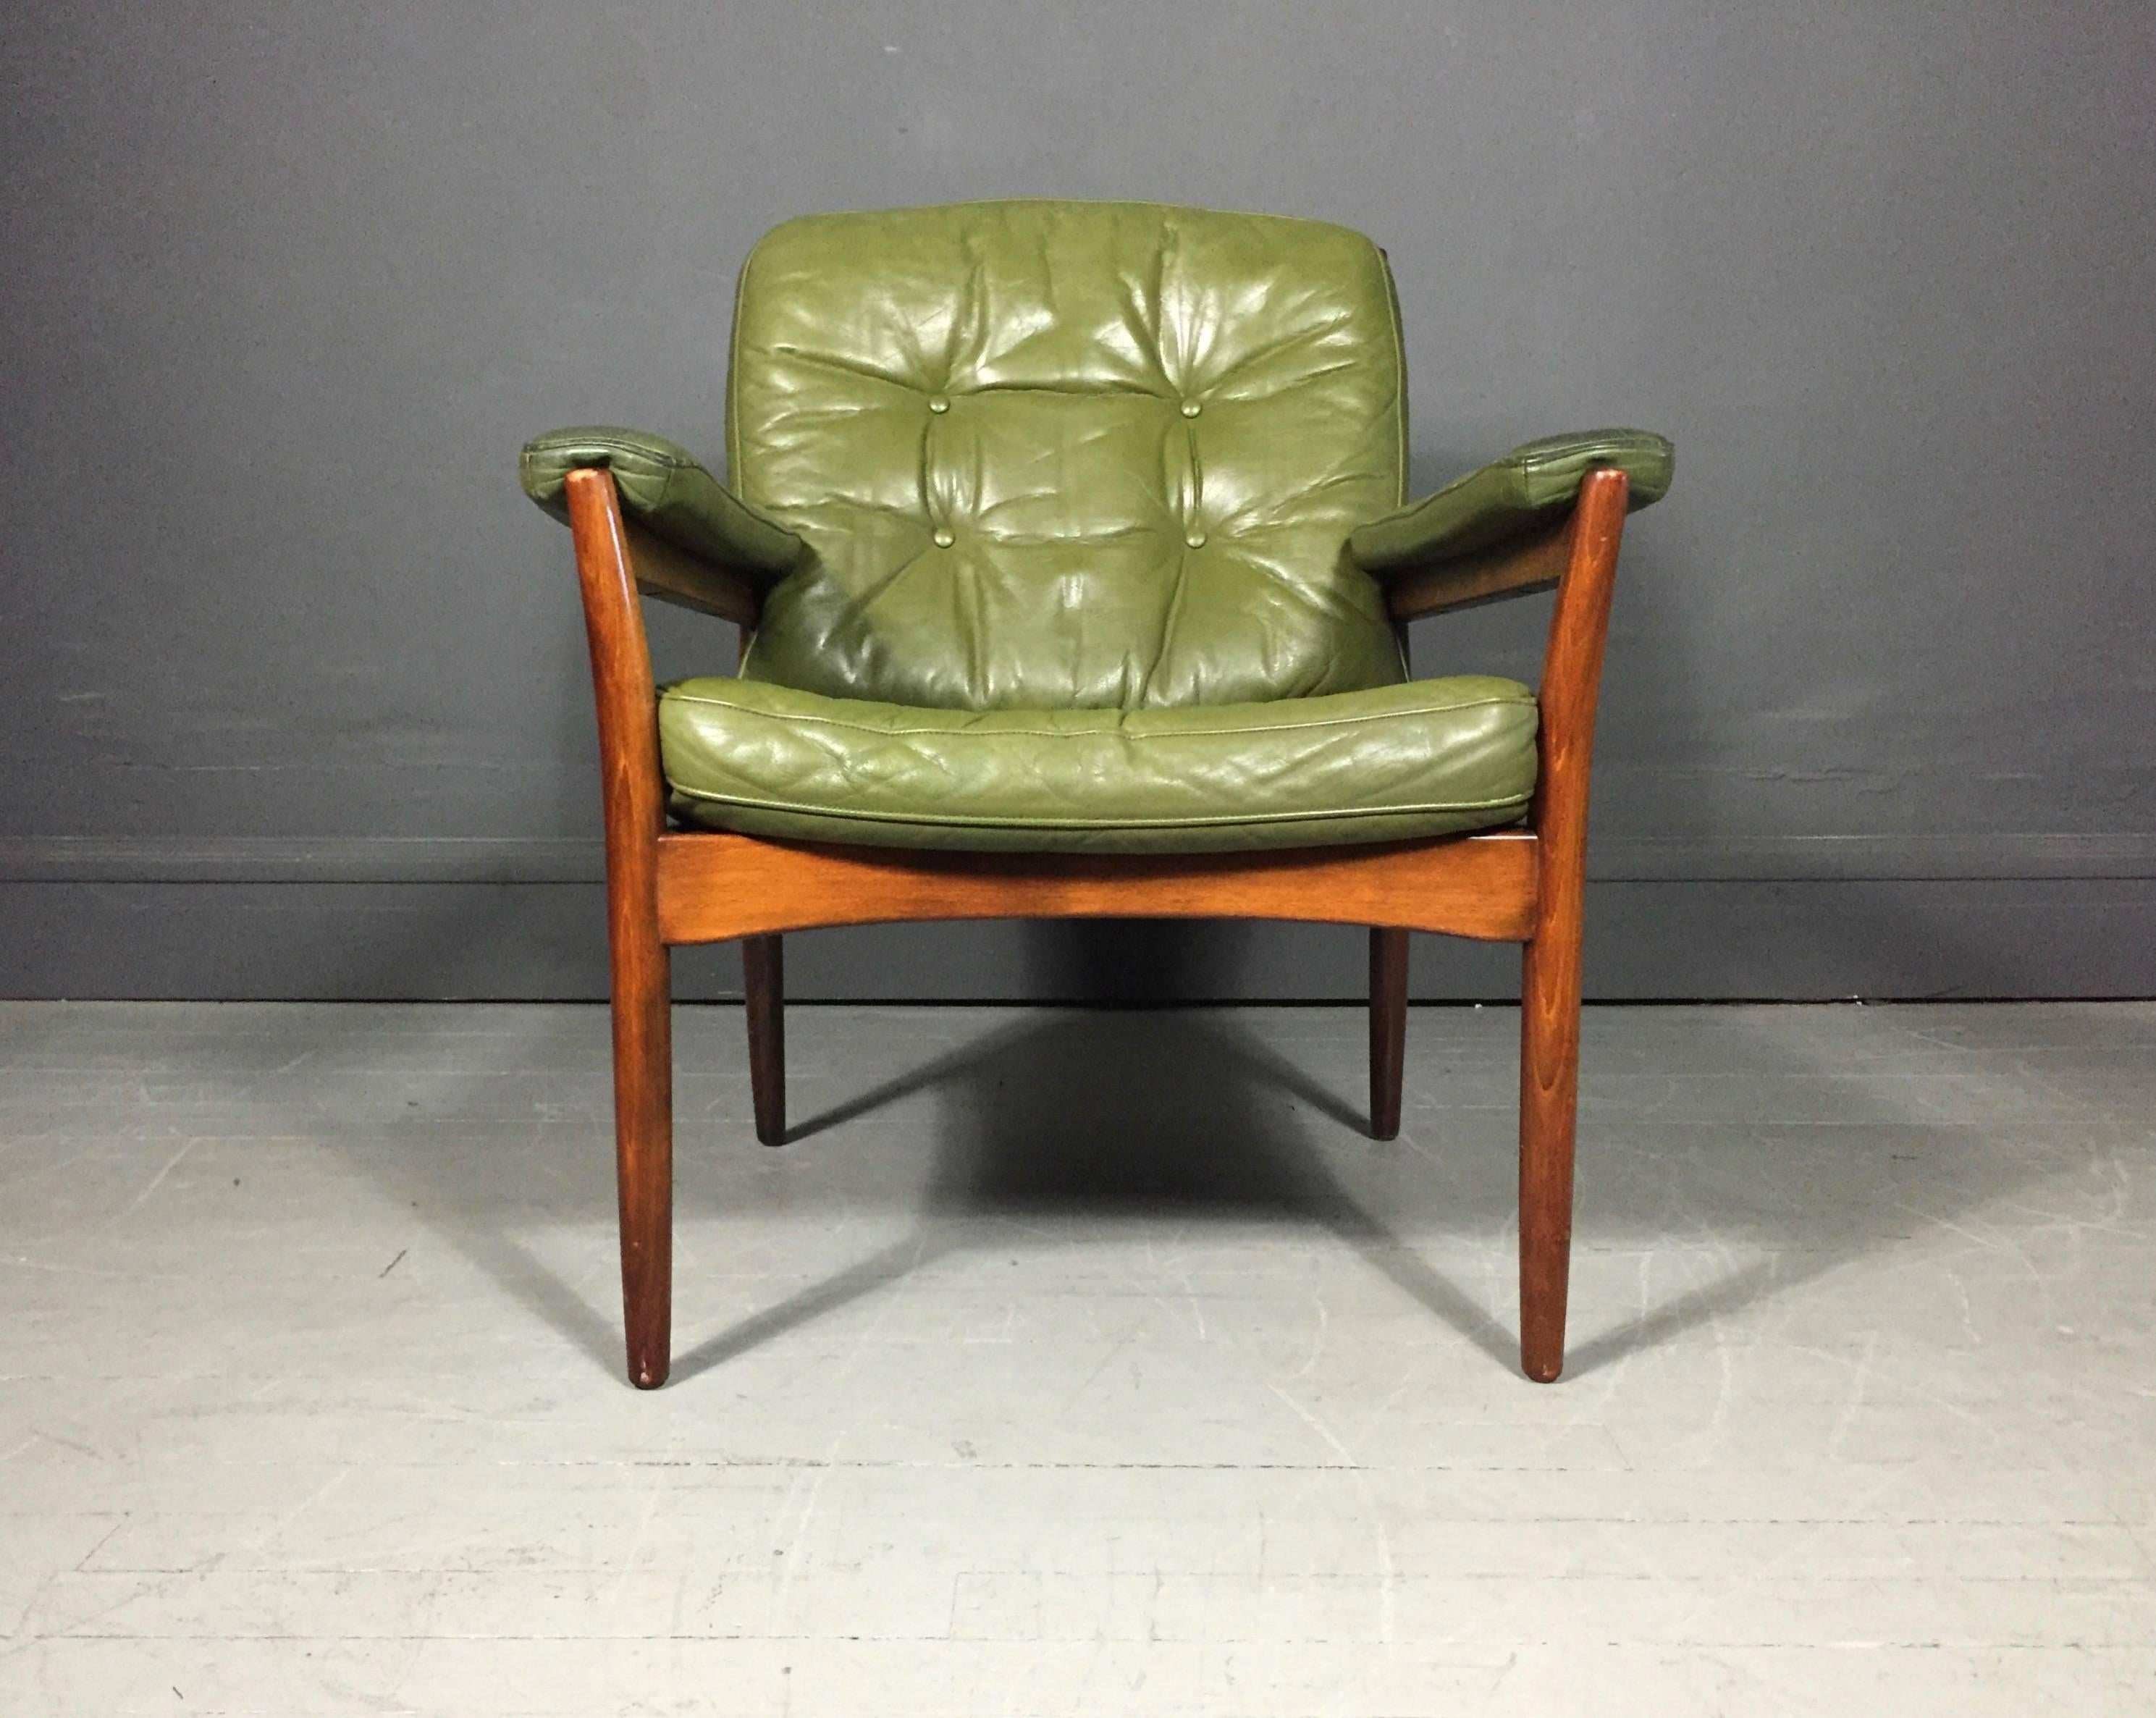 A classic Swedish design with generous proportions not typical of Scandinavian furniture of the period. Luscious and soft button tufted green leather seat, back and arms on a solid teak frame. Designed by Gate Möbler of Sweden, made between